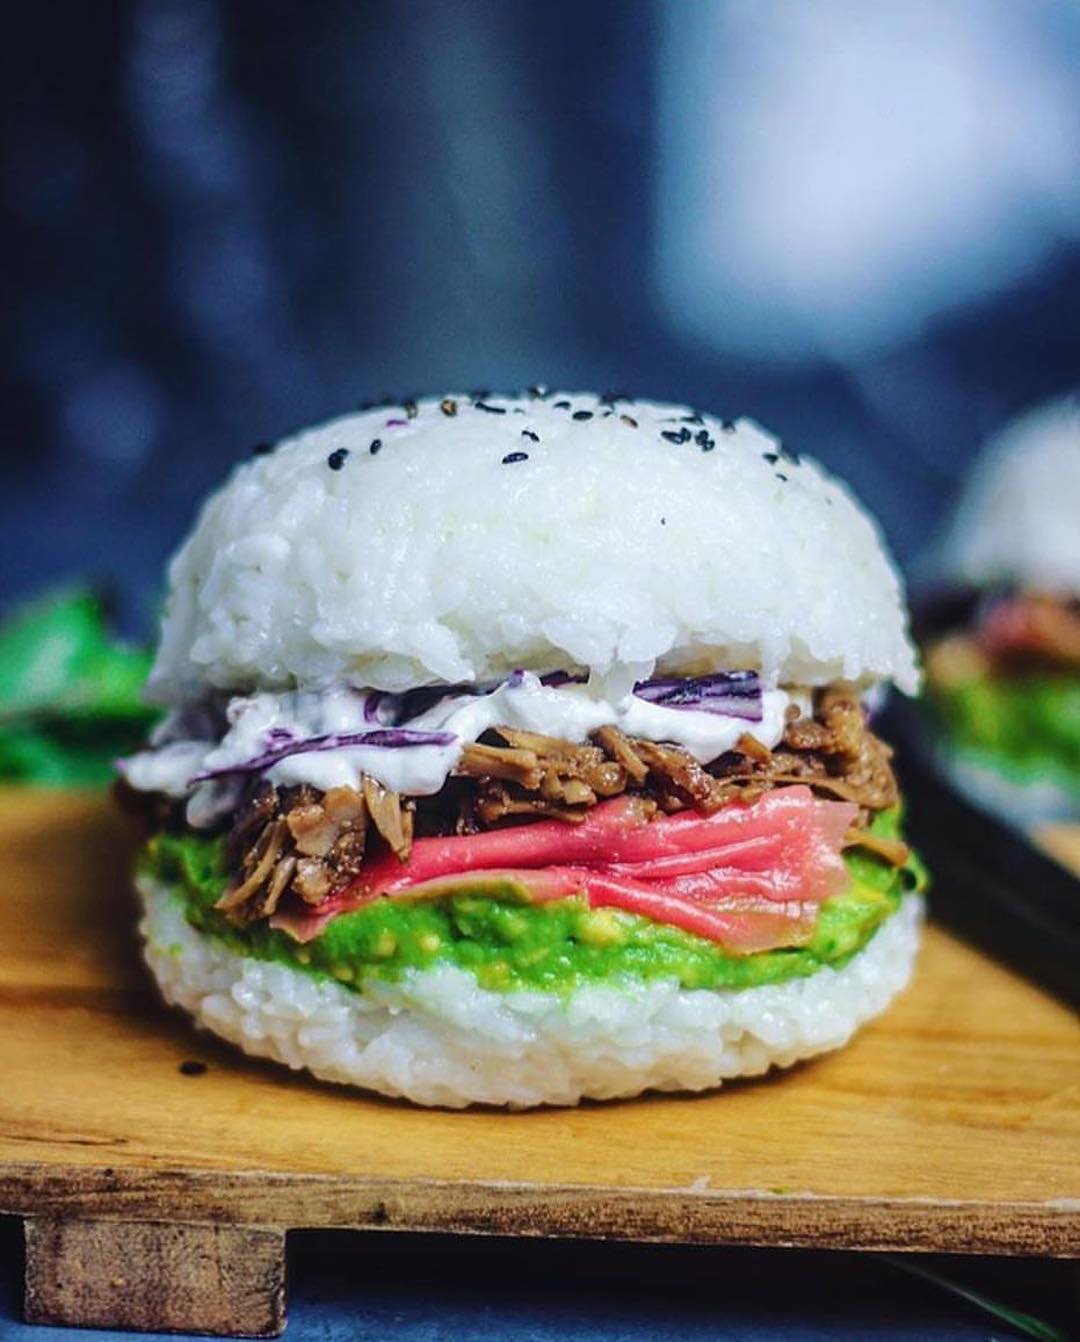 TERIYAKI__CHIK_N__SUSHI_BURGER_by__sobeautifullyraw____To_make_the_Sushi_Rice_Bun_Prepare_your_desired_amount_of_sushi_rice__I_used_around_2.5_cups_COOKED_sushi_rice_for_2_burgers__and_season_it_with_sushi_vinegar._Let_the_rice_completely_cool_in_the.jpg